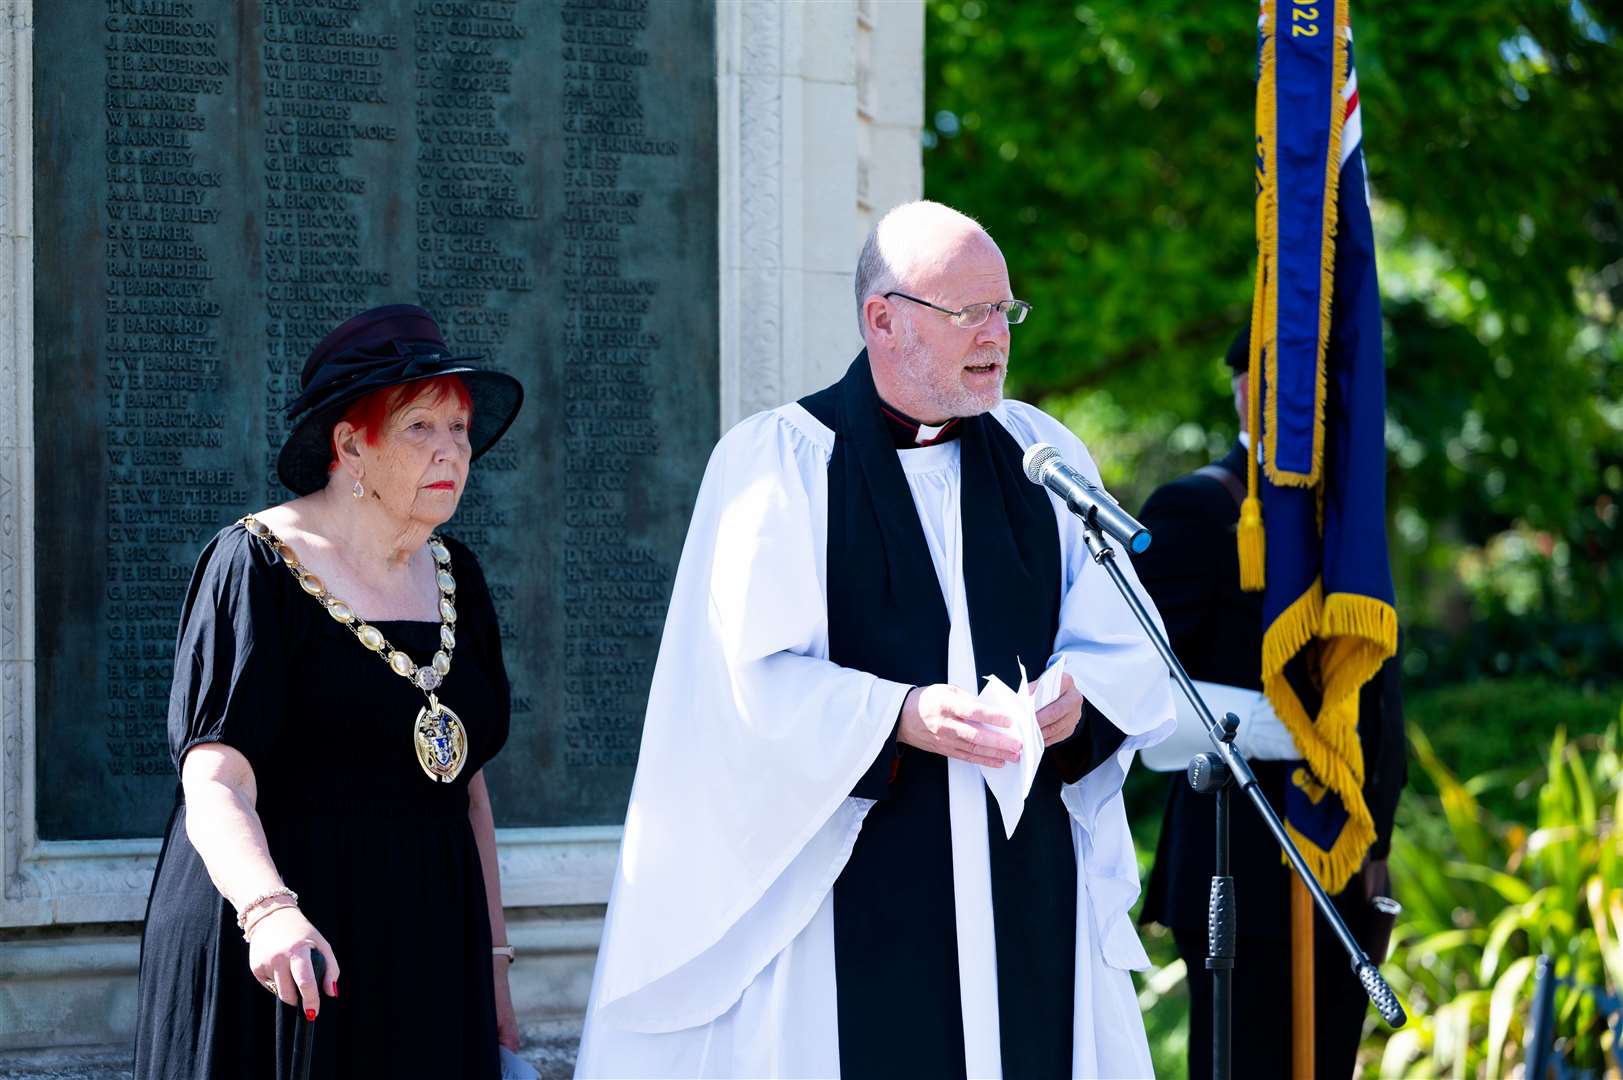 VJ Day service was held at King’s Lynn’s Tower Gardens to remember the ‘Forgotten Army’. Picture: Ian Burt